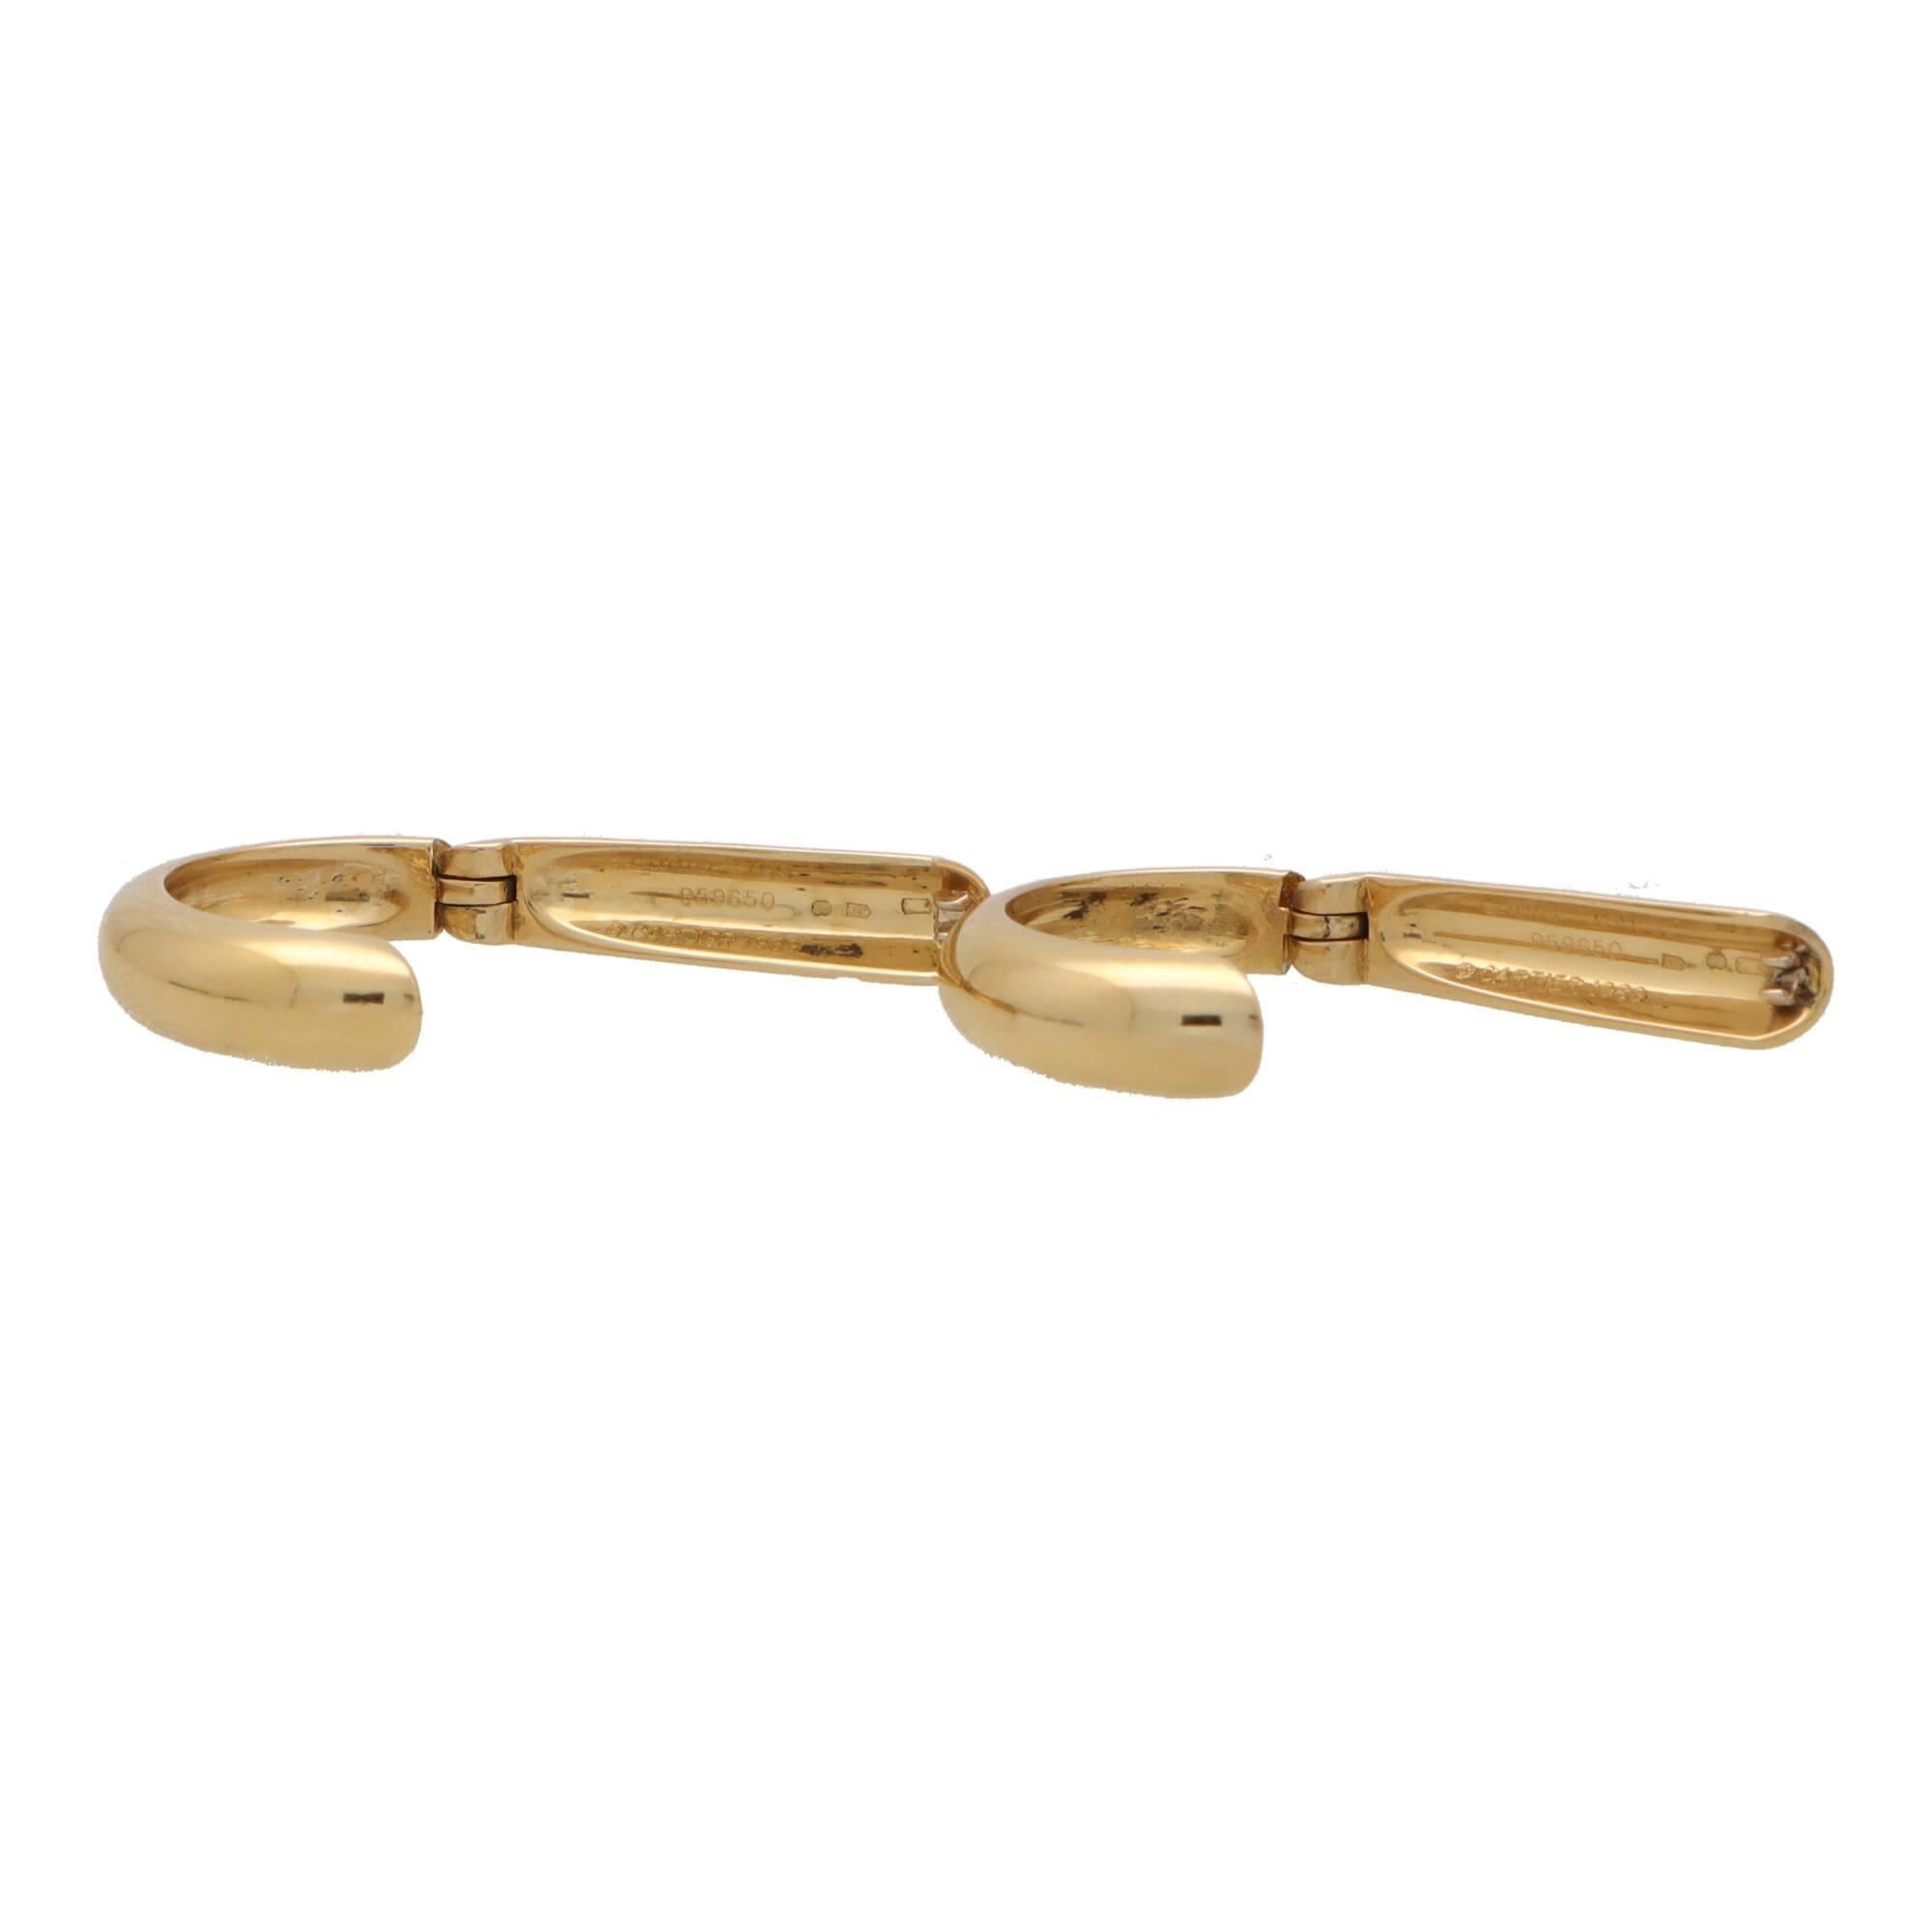 A stylish pair of vintage Cartier clip cufflinks set in 18k yellow gold.

These cufflinks display classic Cartier elegance and can easily put on and off by the clever clip mechanism! 

When lying flat each cufflinks measures 1.5 x 2.4 centimetres